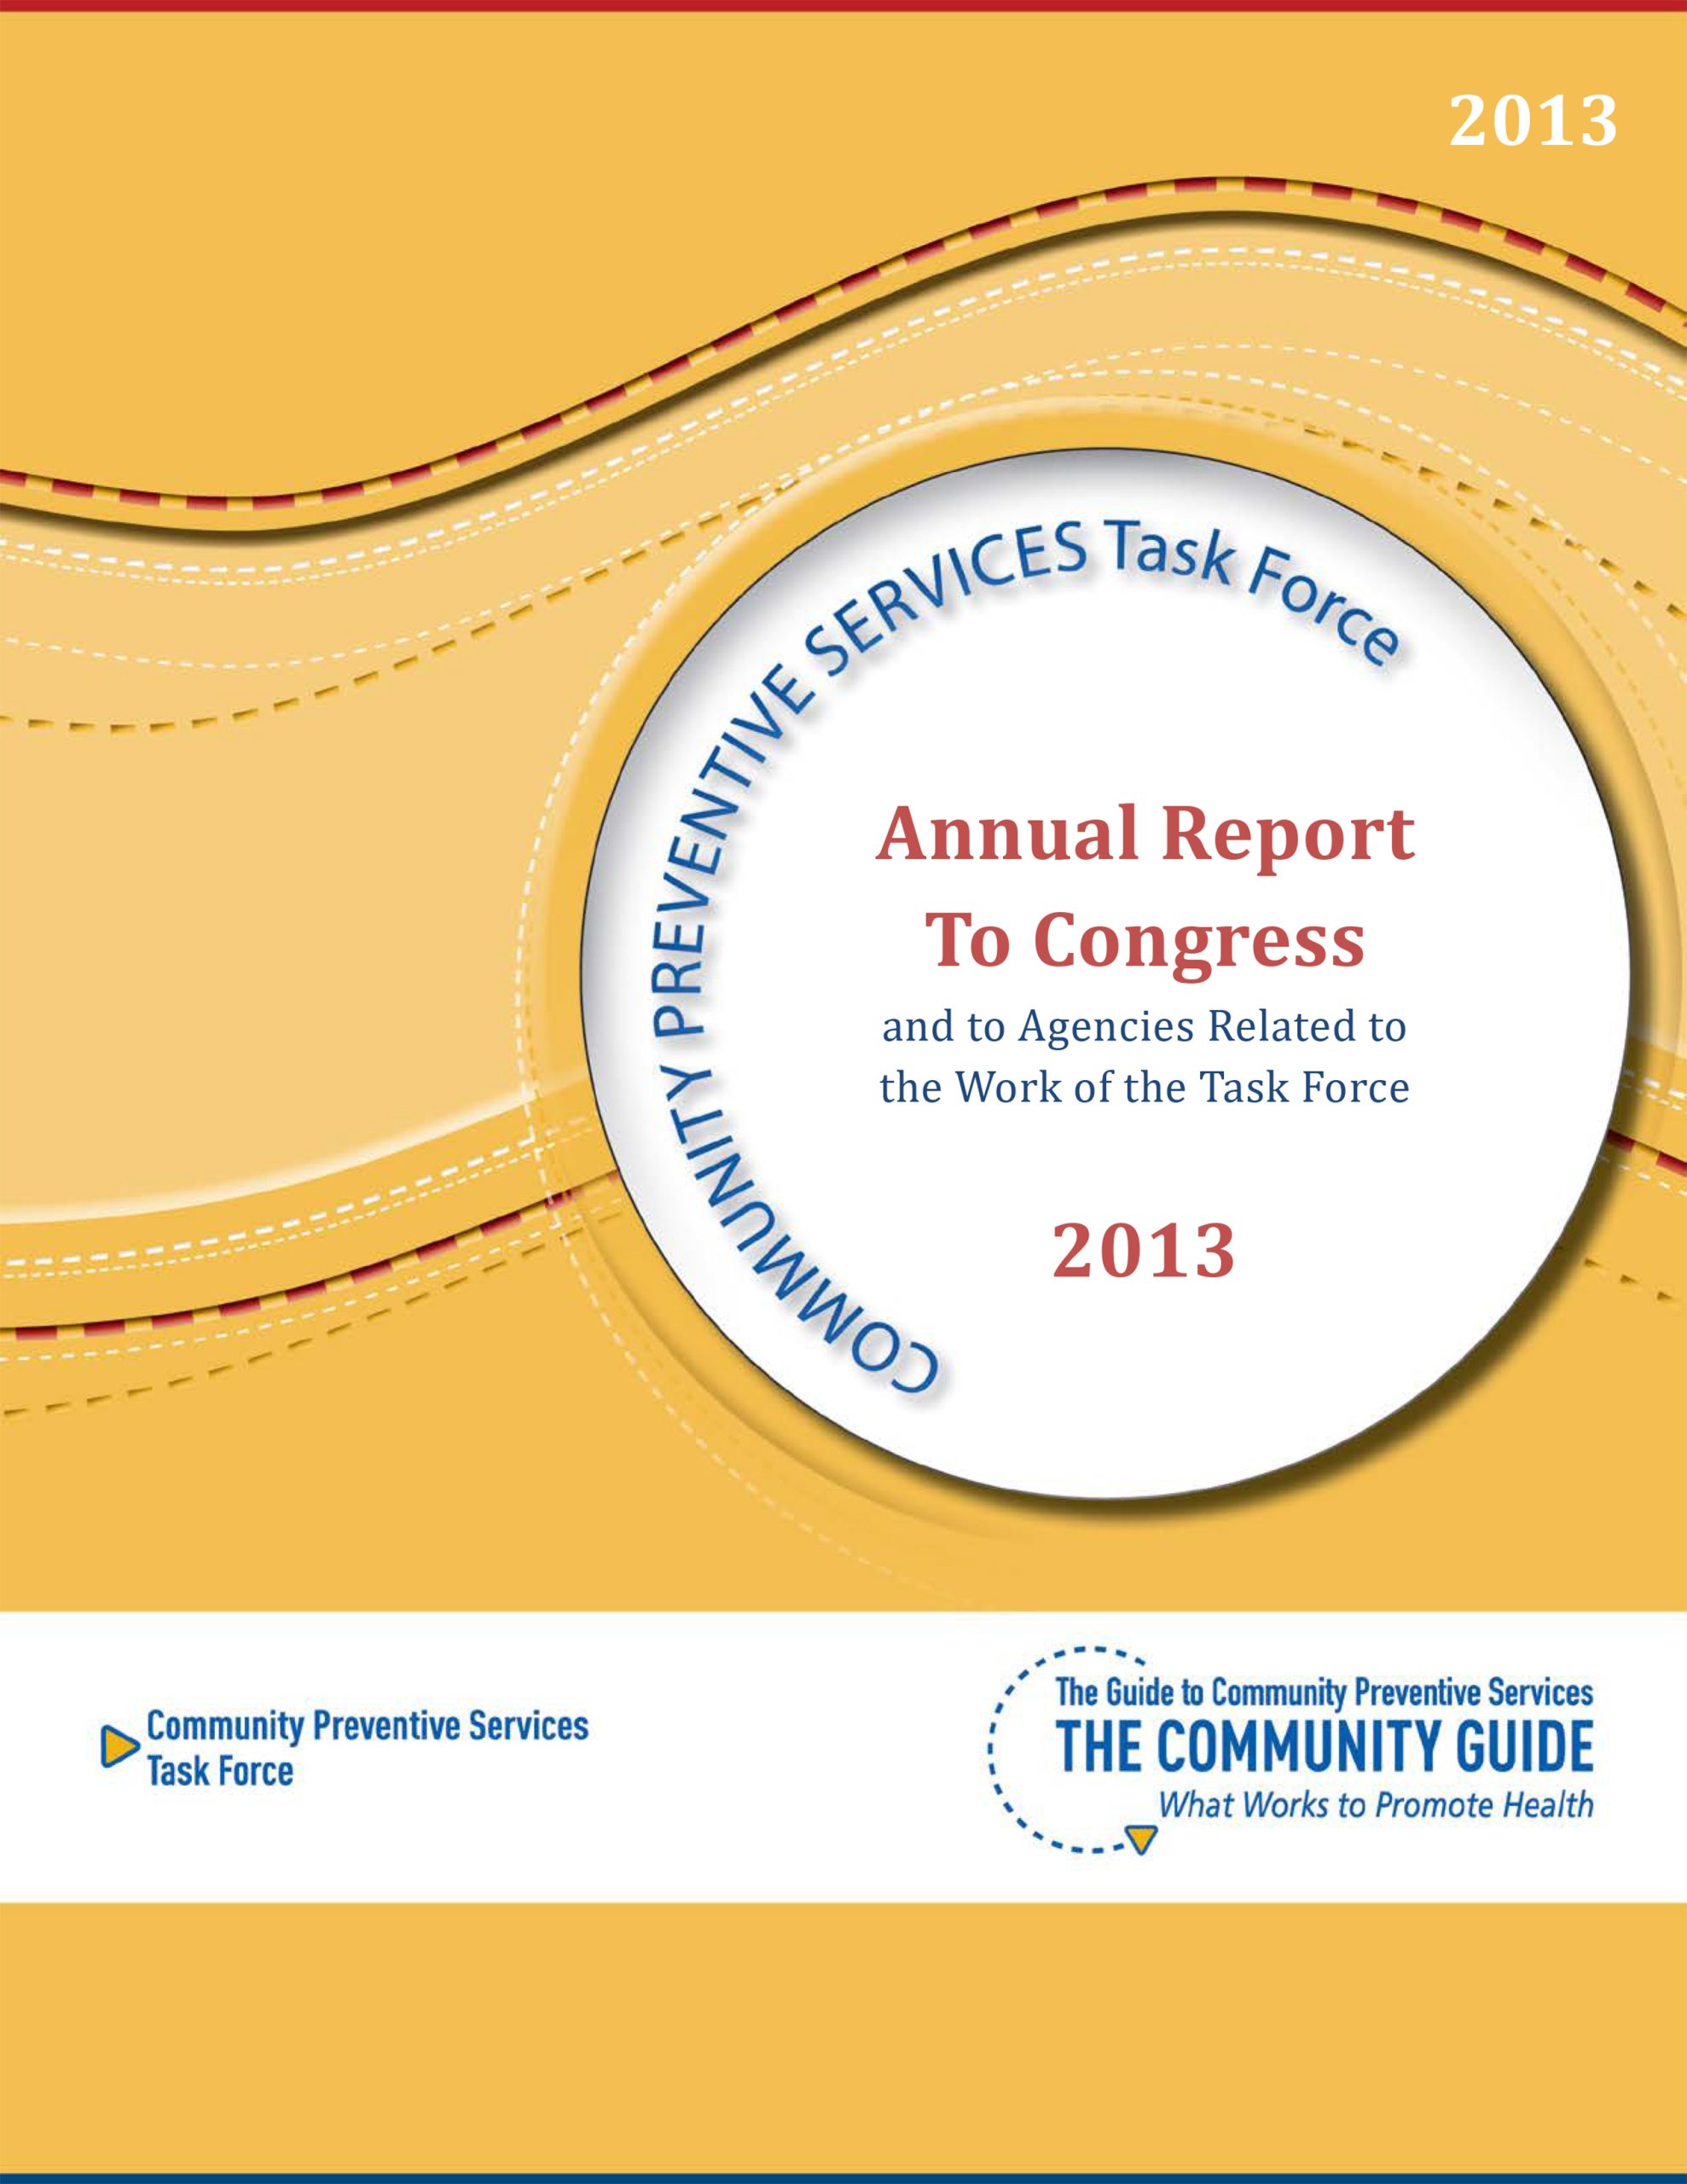 The cover of the 2013 CPSTF Annual Report to Congress